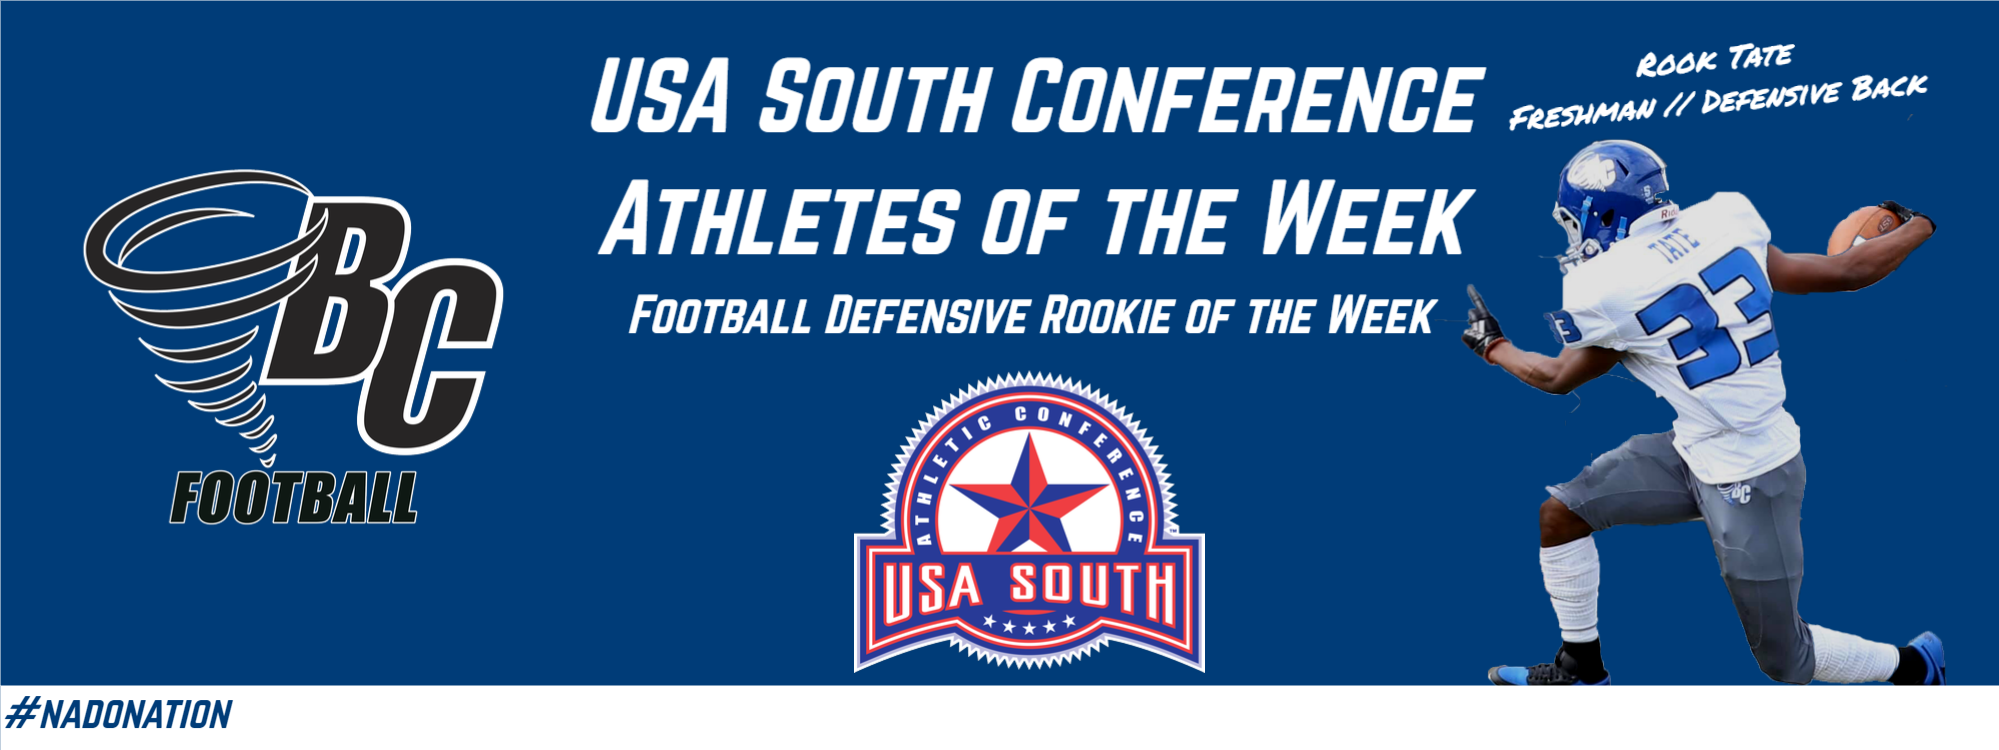 Rook Tate Secures USA South Football Defensive Rookie of the Week Award